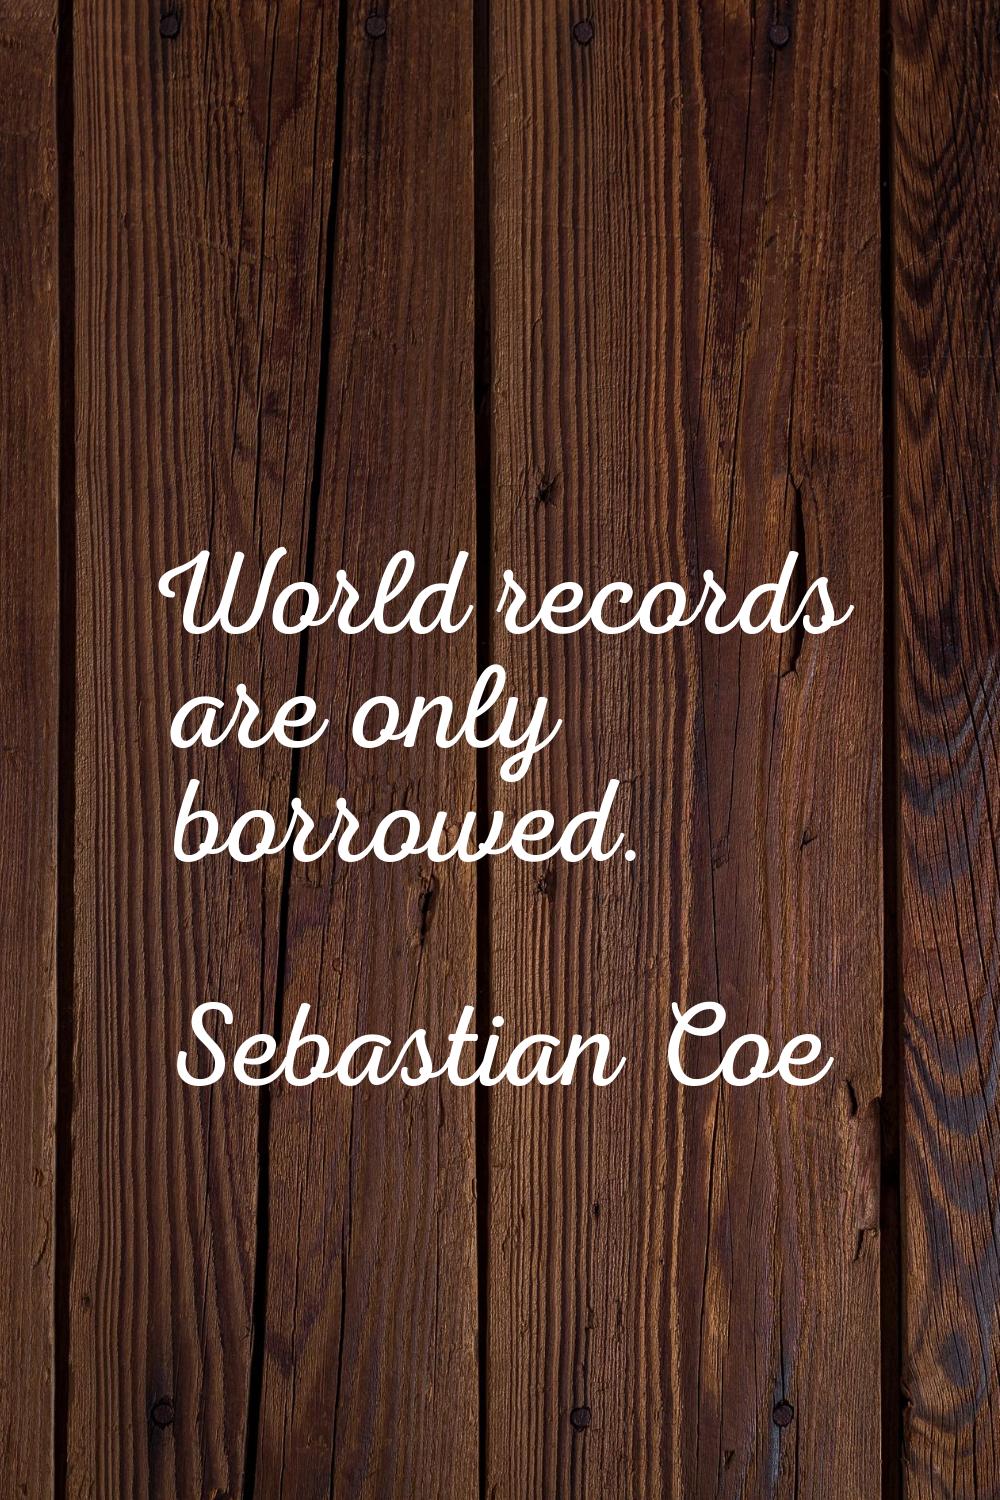 World records are only borrowed.